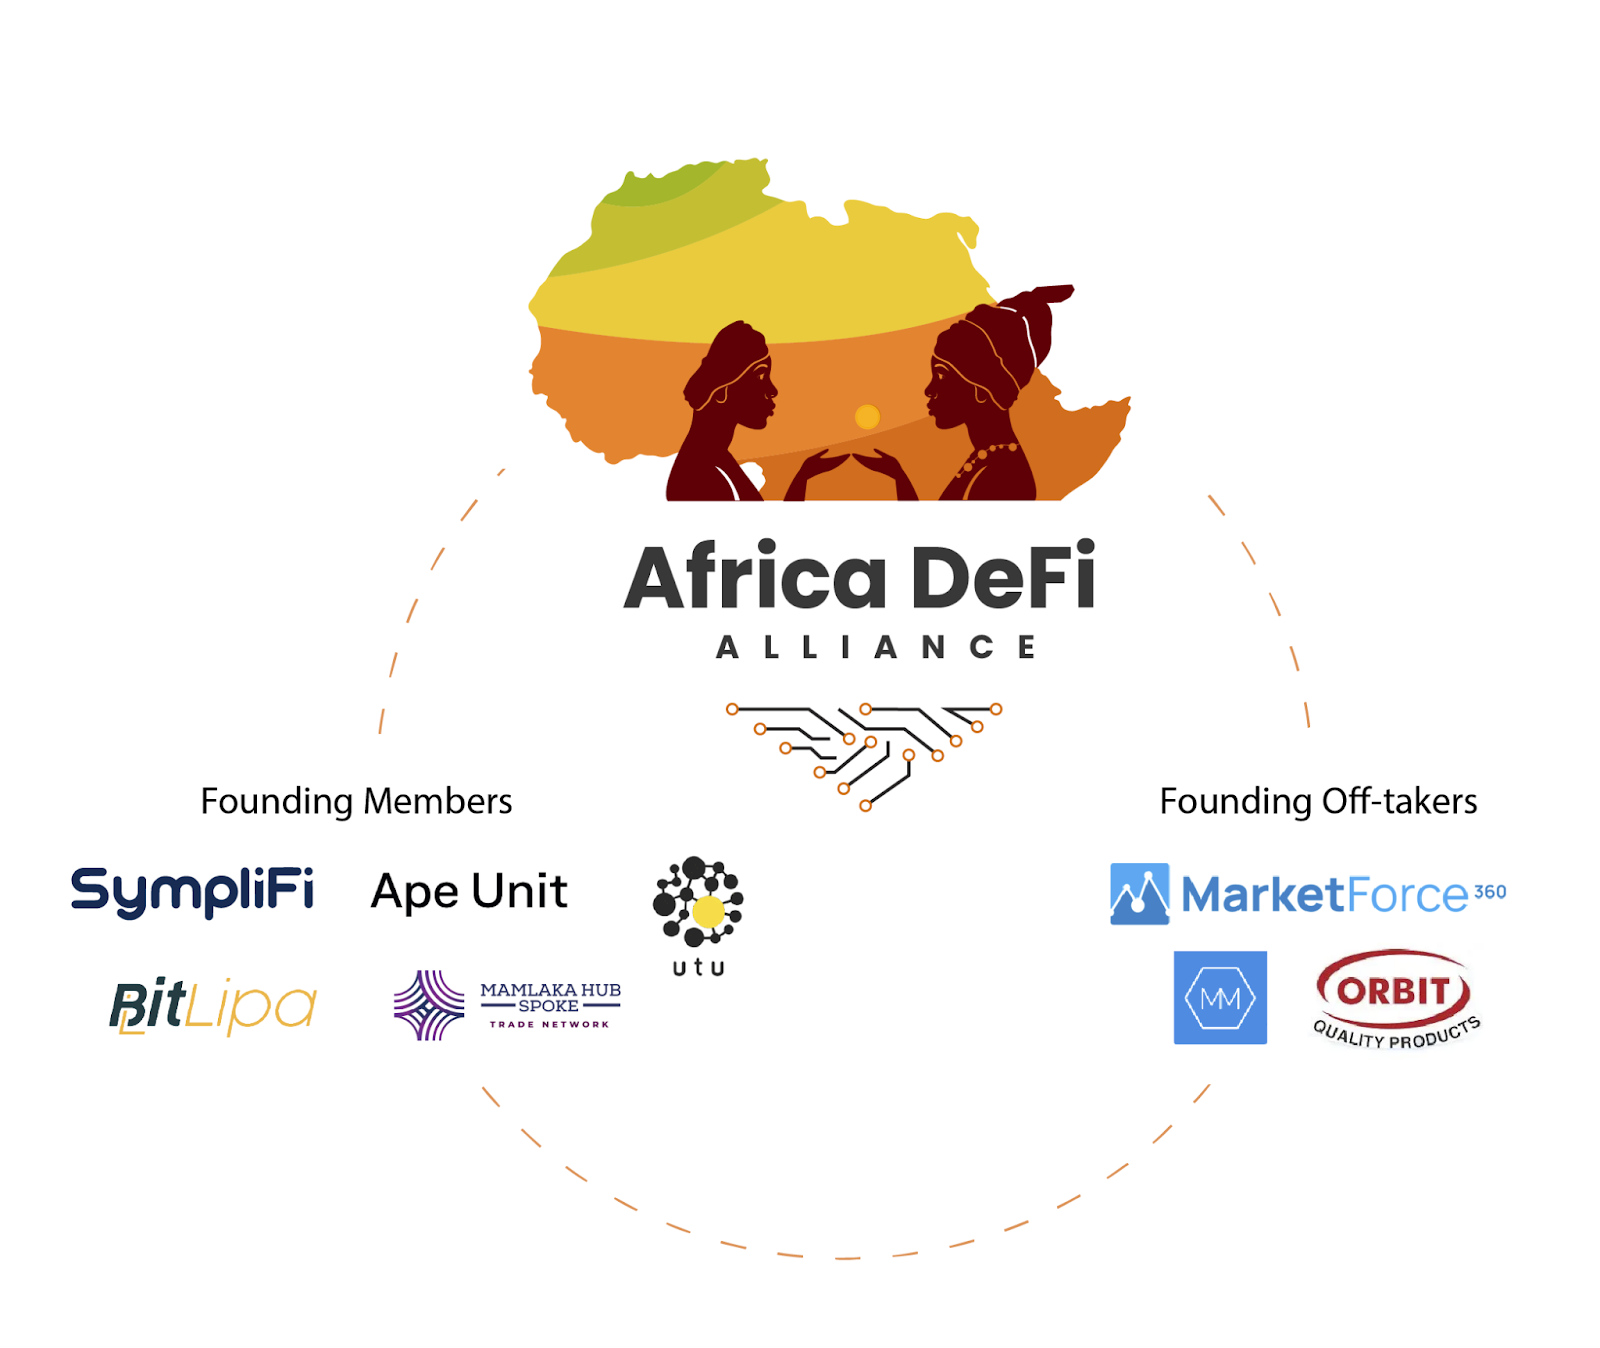 Launch of the Africa DeFi Alliance DAO